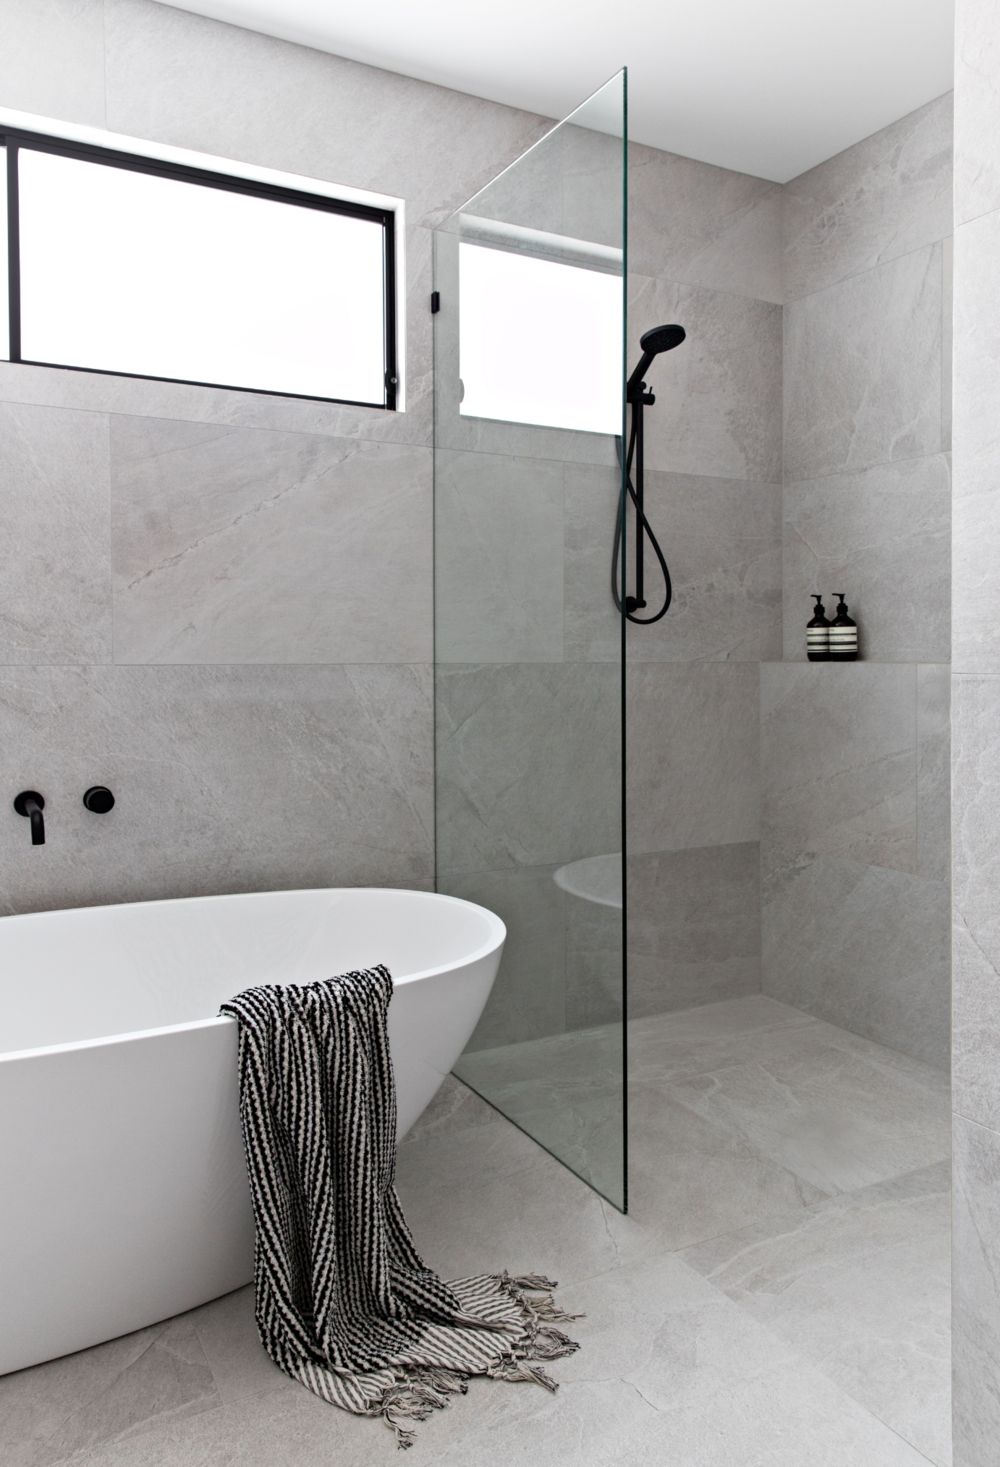 Mix Or Match? Our Tips For Picking The Perfect Tile — Zephyr + Stone